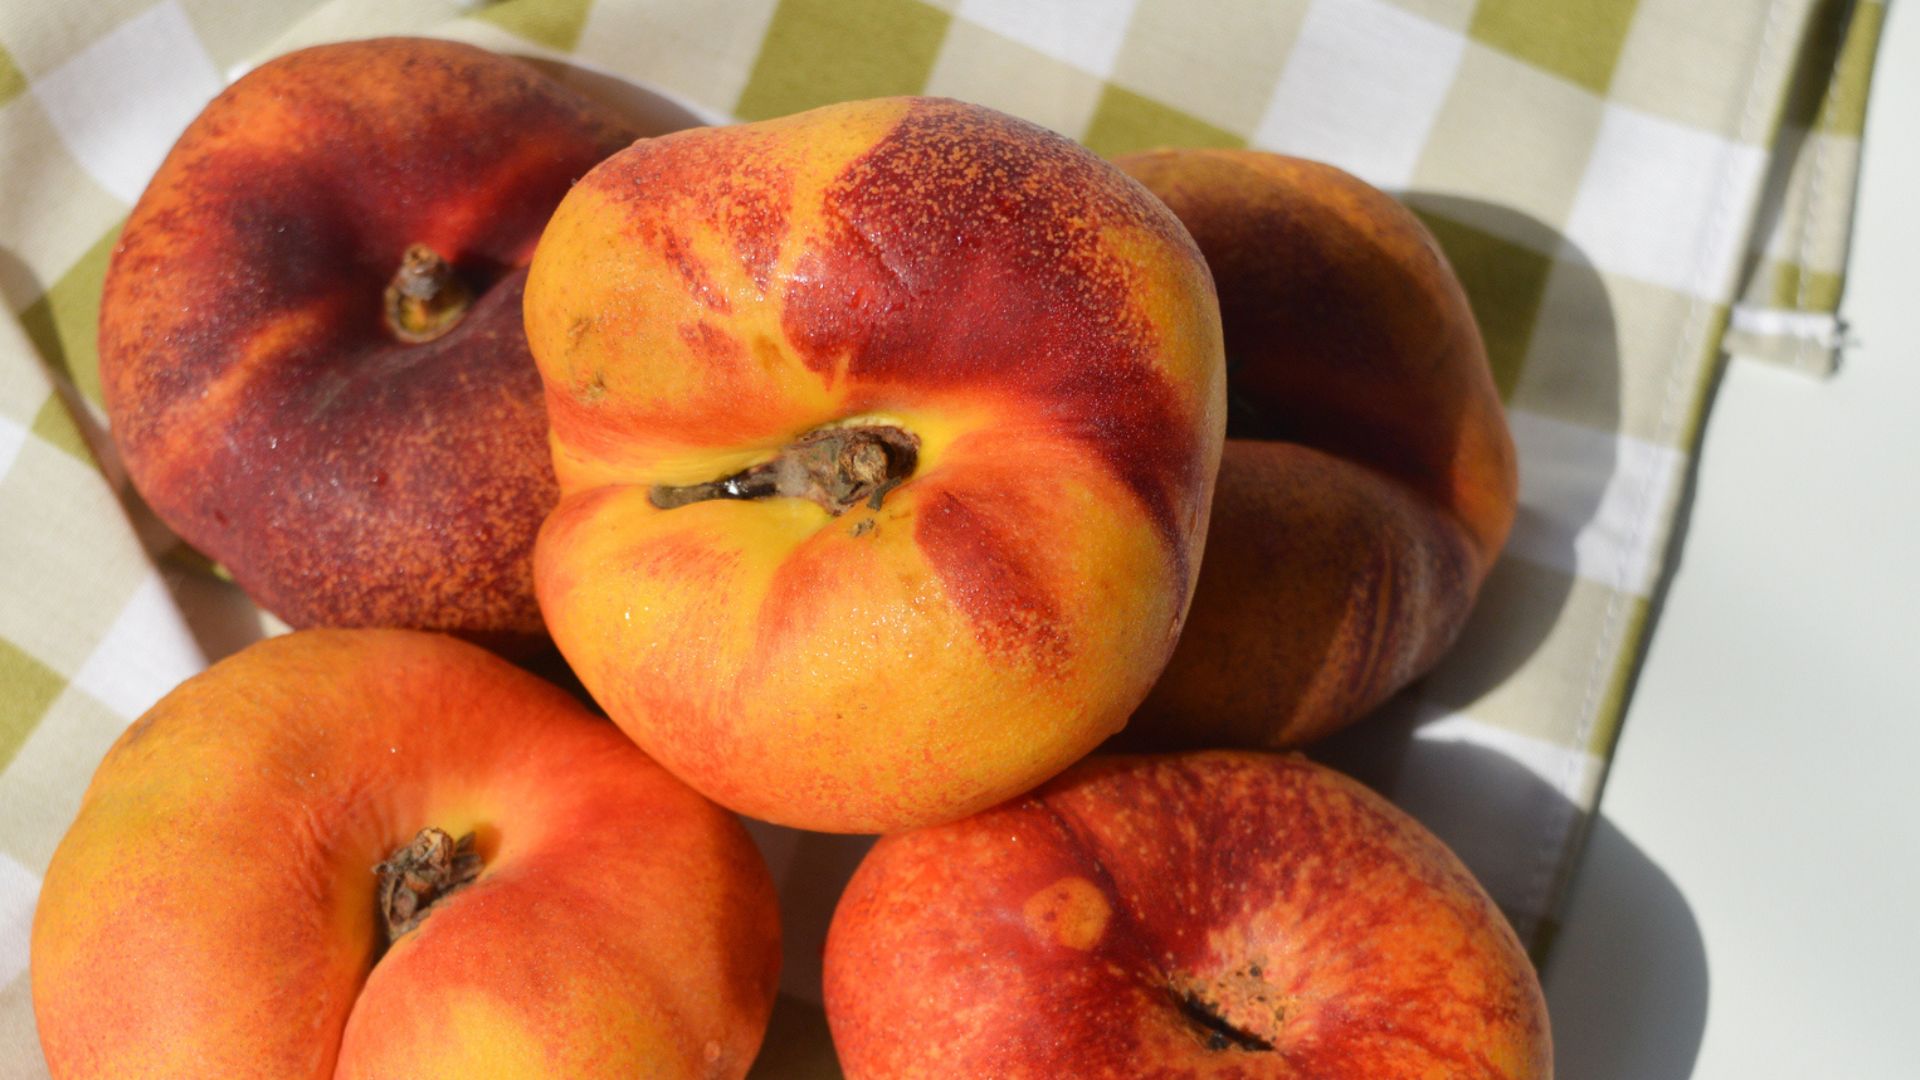 Collection of flat peaches bunched together on checked tablecloth